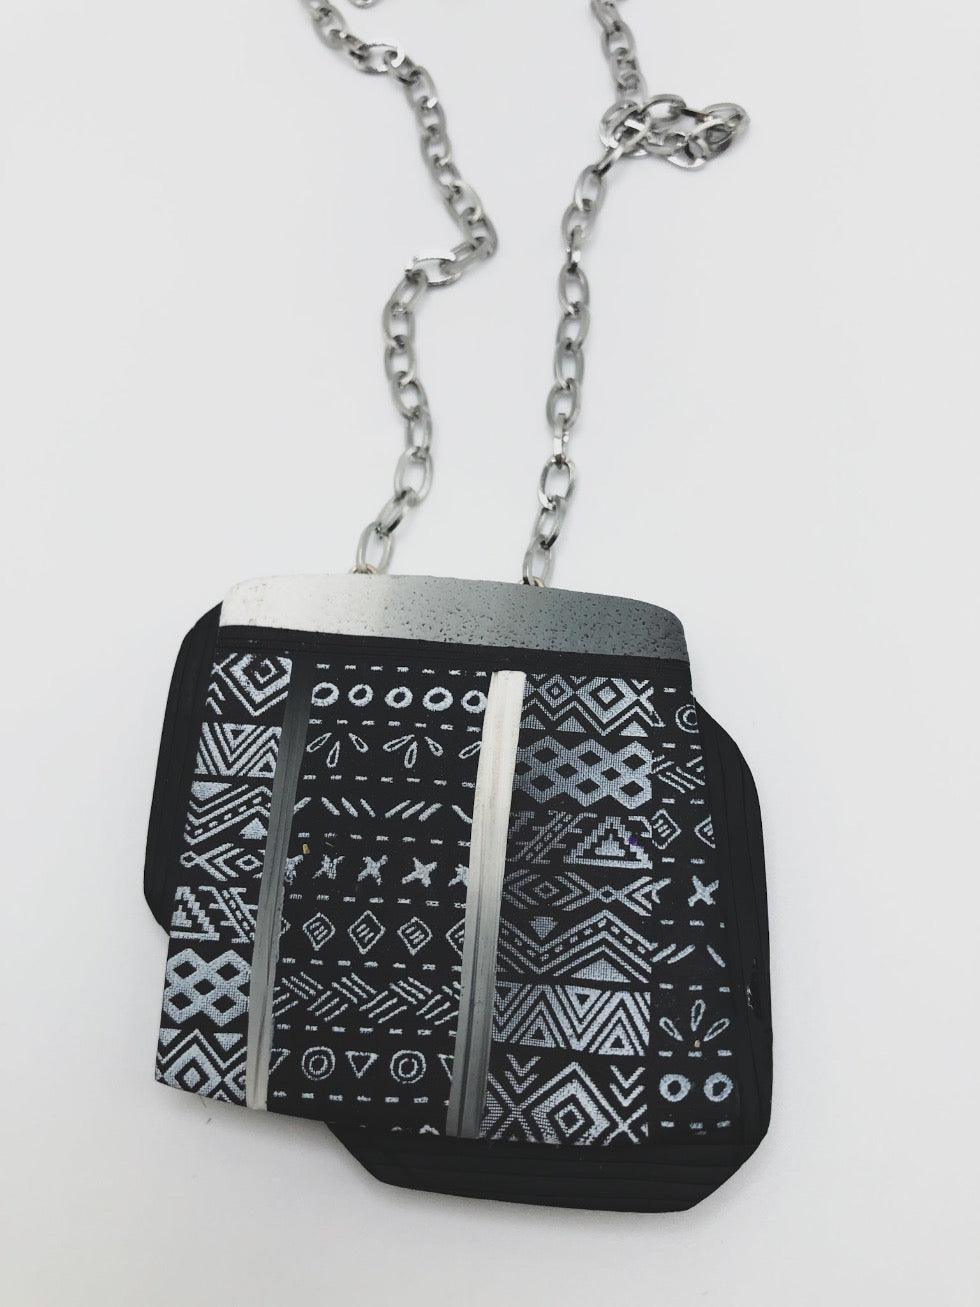 Black and white with pattern pendant